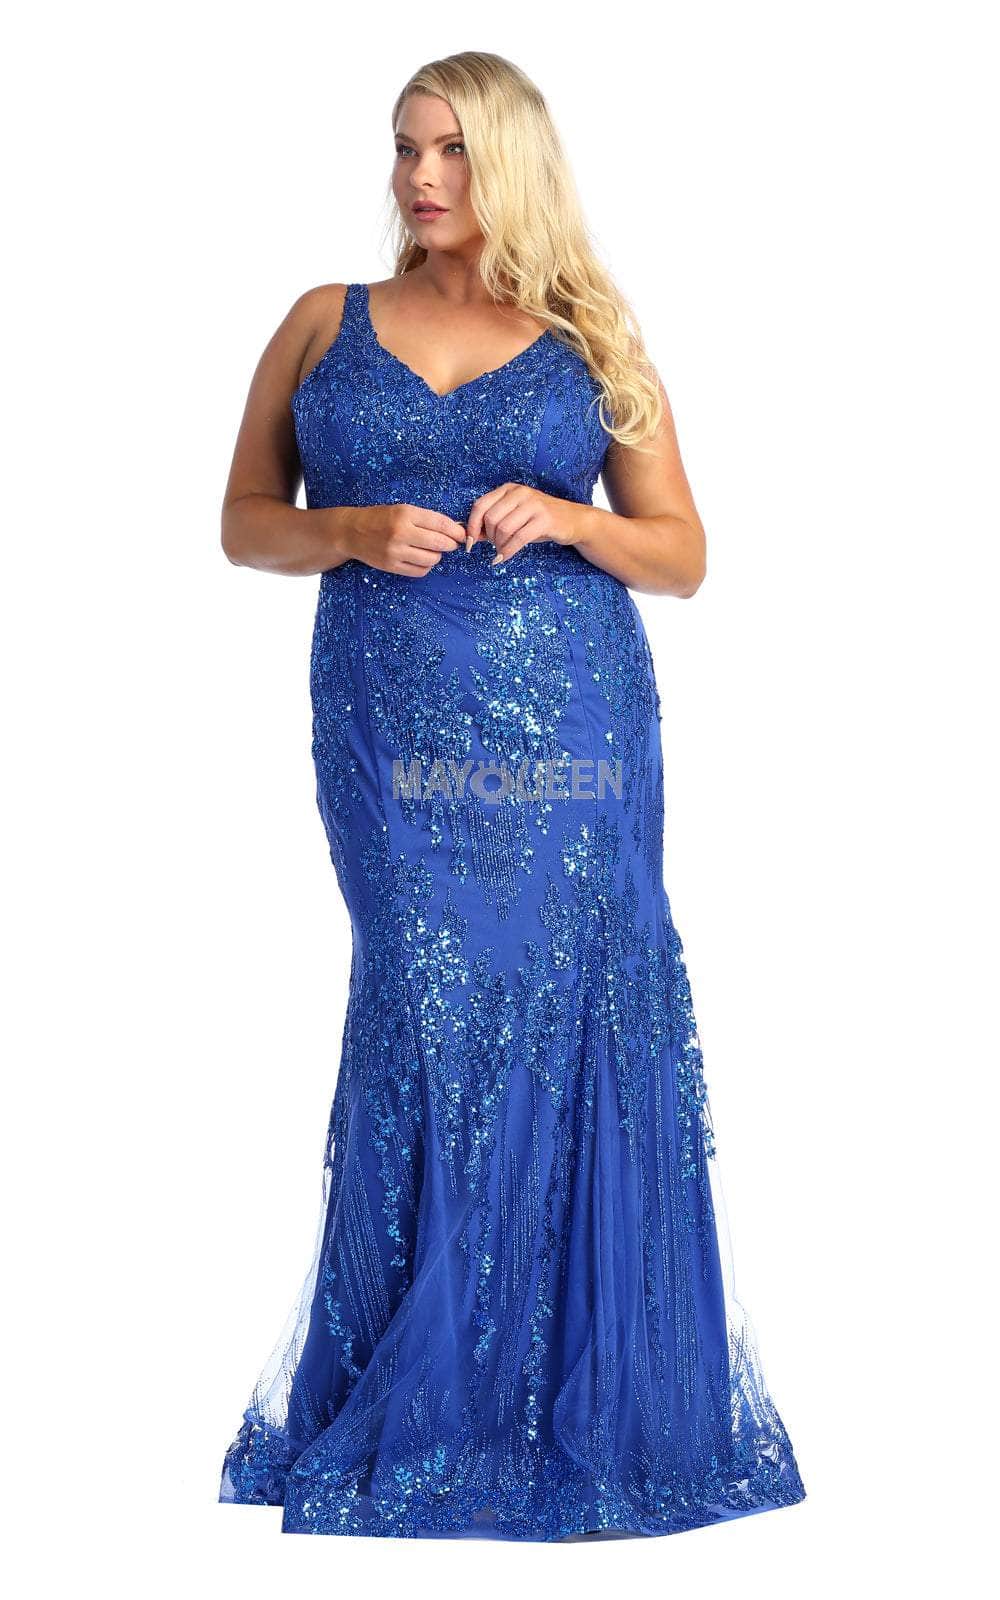 May Queen RQ7941 - Sequined Cut-out Evening Dress Special Occasion Dress